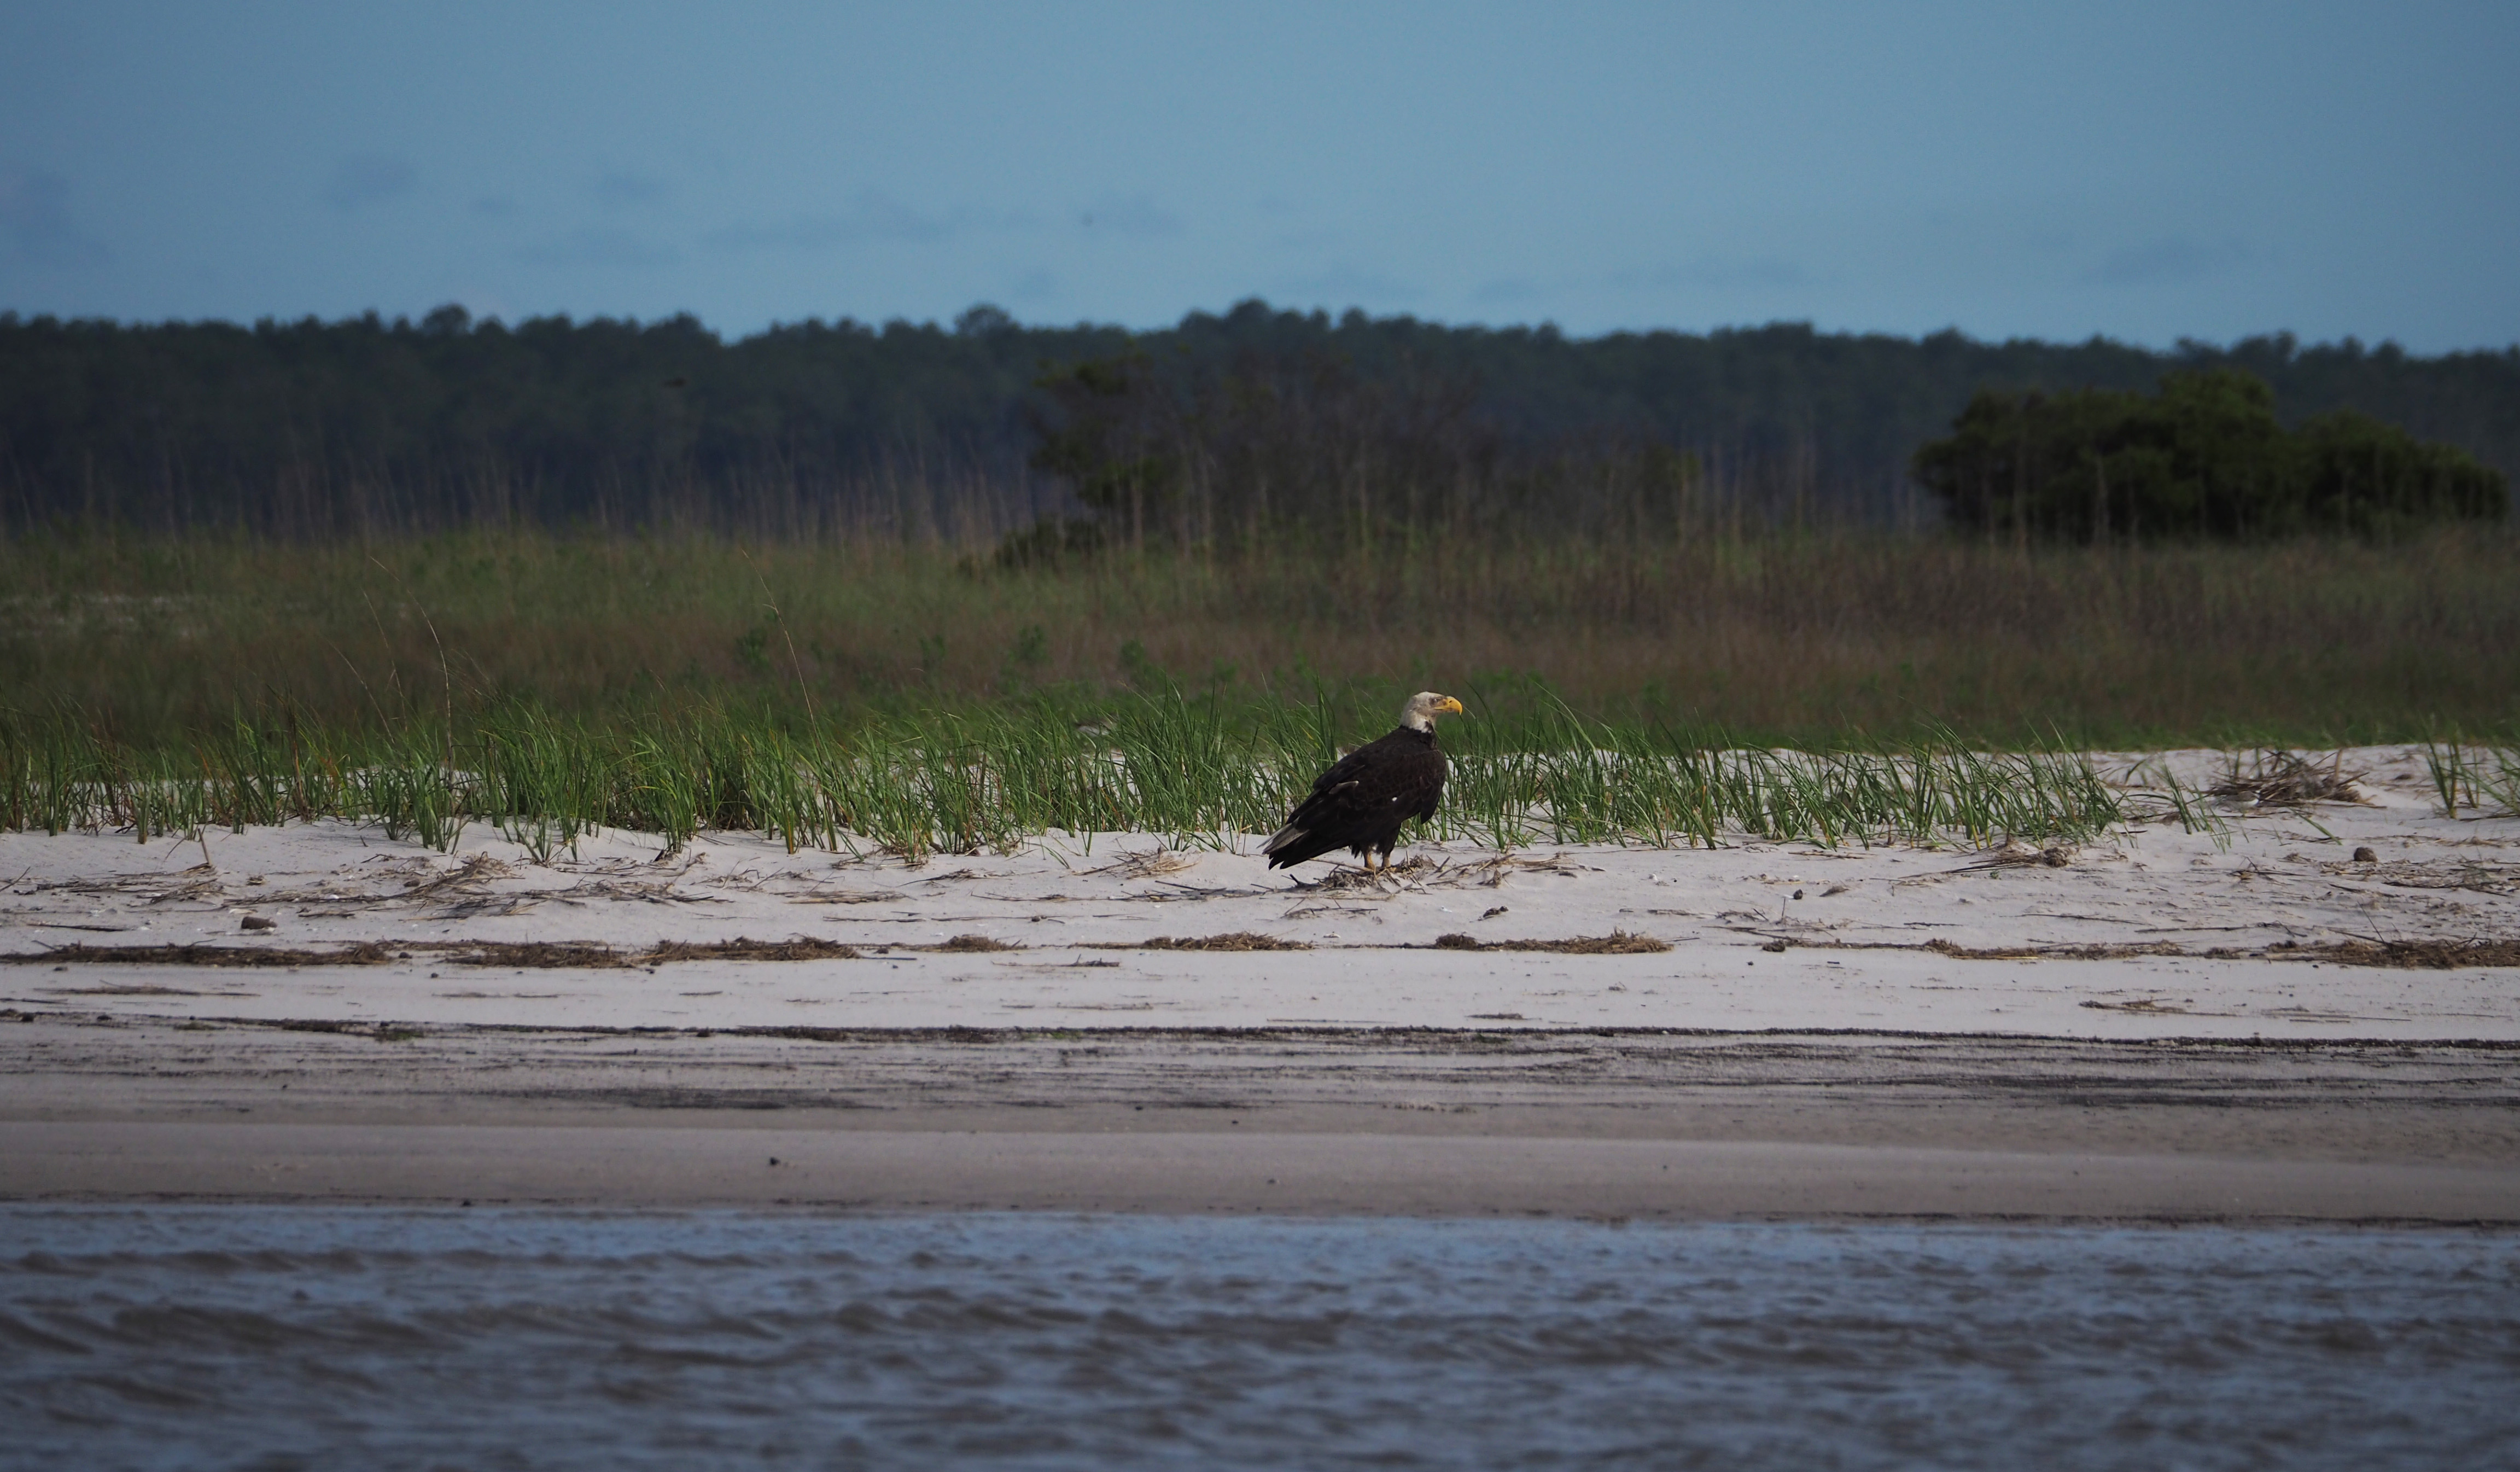 Our shorebird counts are sometimes disrupted, such as when this eagle decided to visit the beach in the middle of our count.